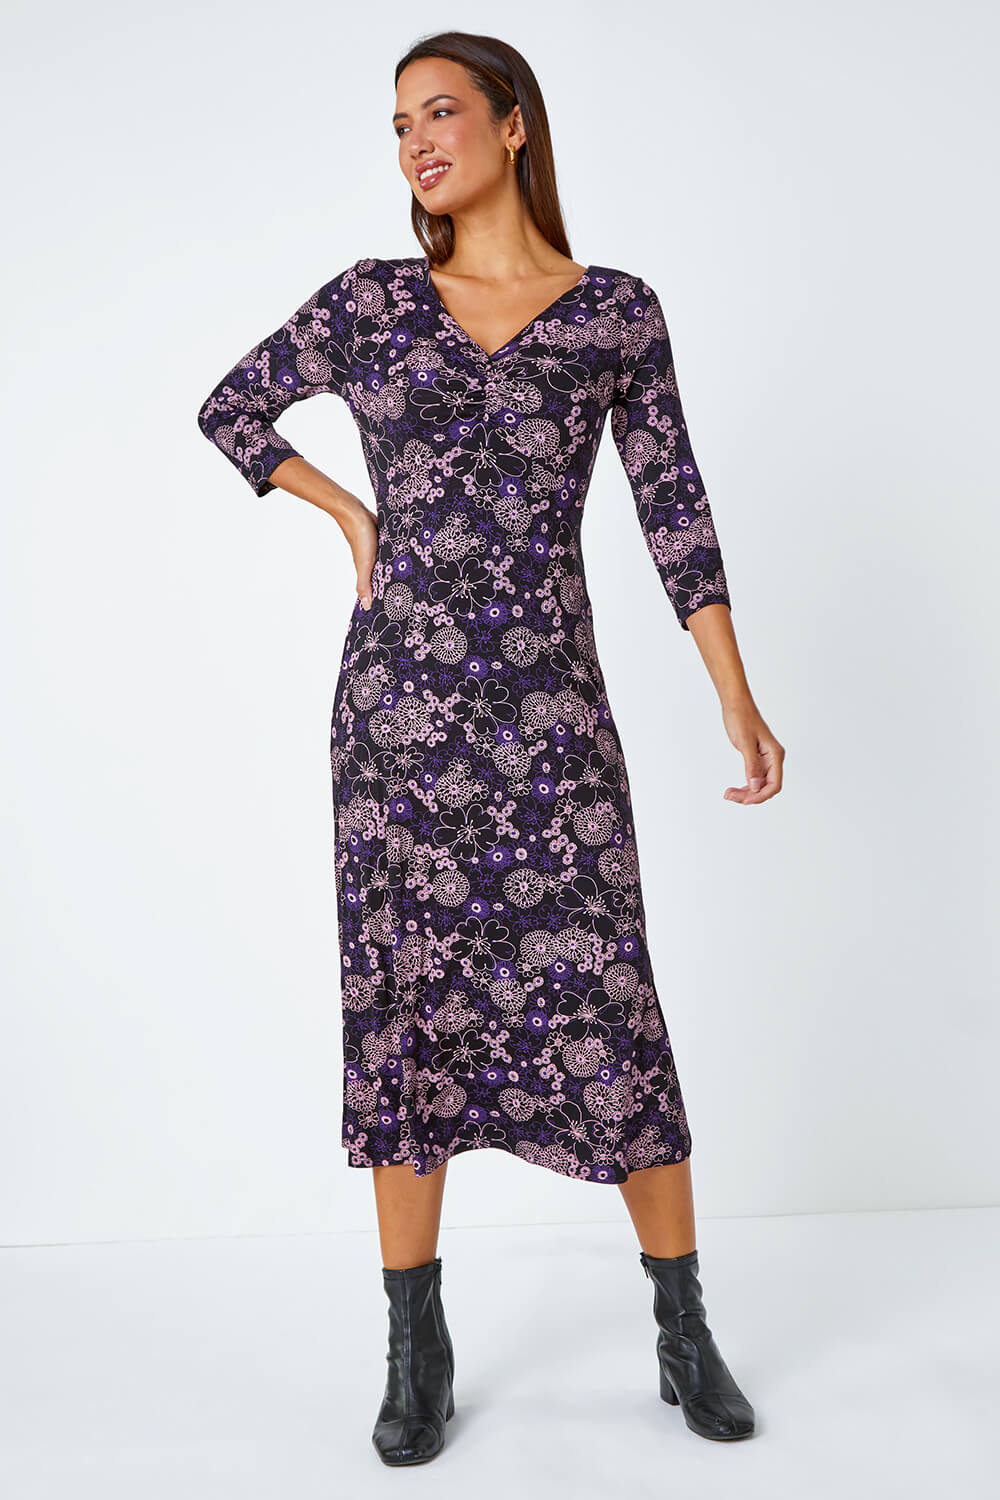 Purple Floral Print Ruched Midi Stretch Dress, Image 2 of 5